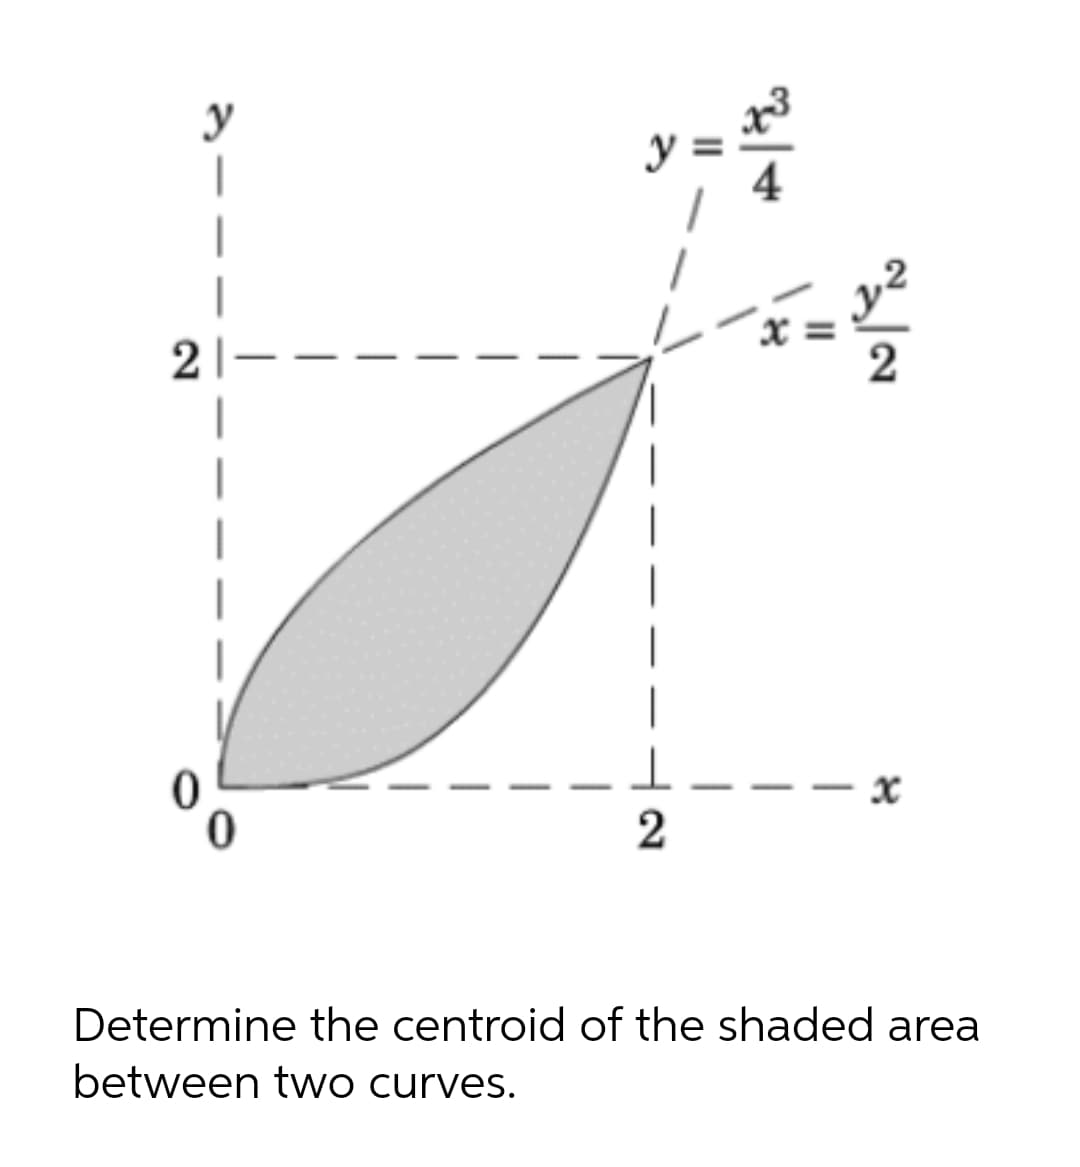 y
2
- x
Determine the centroid of the shaded area
between two curves.
2.
